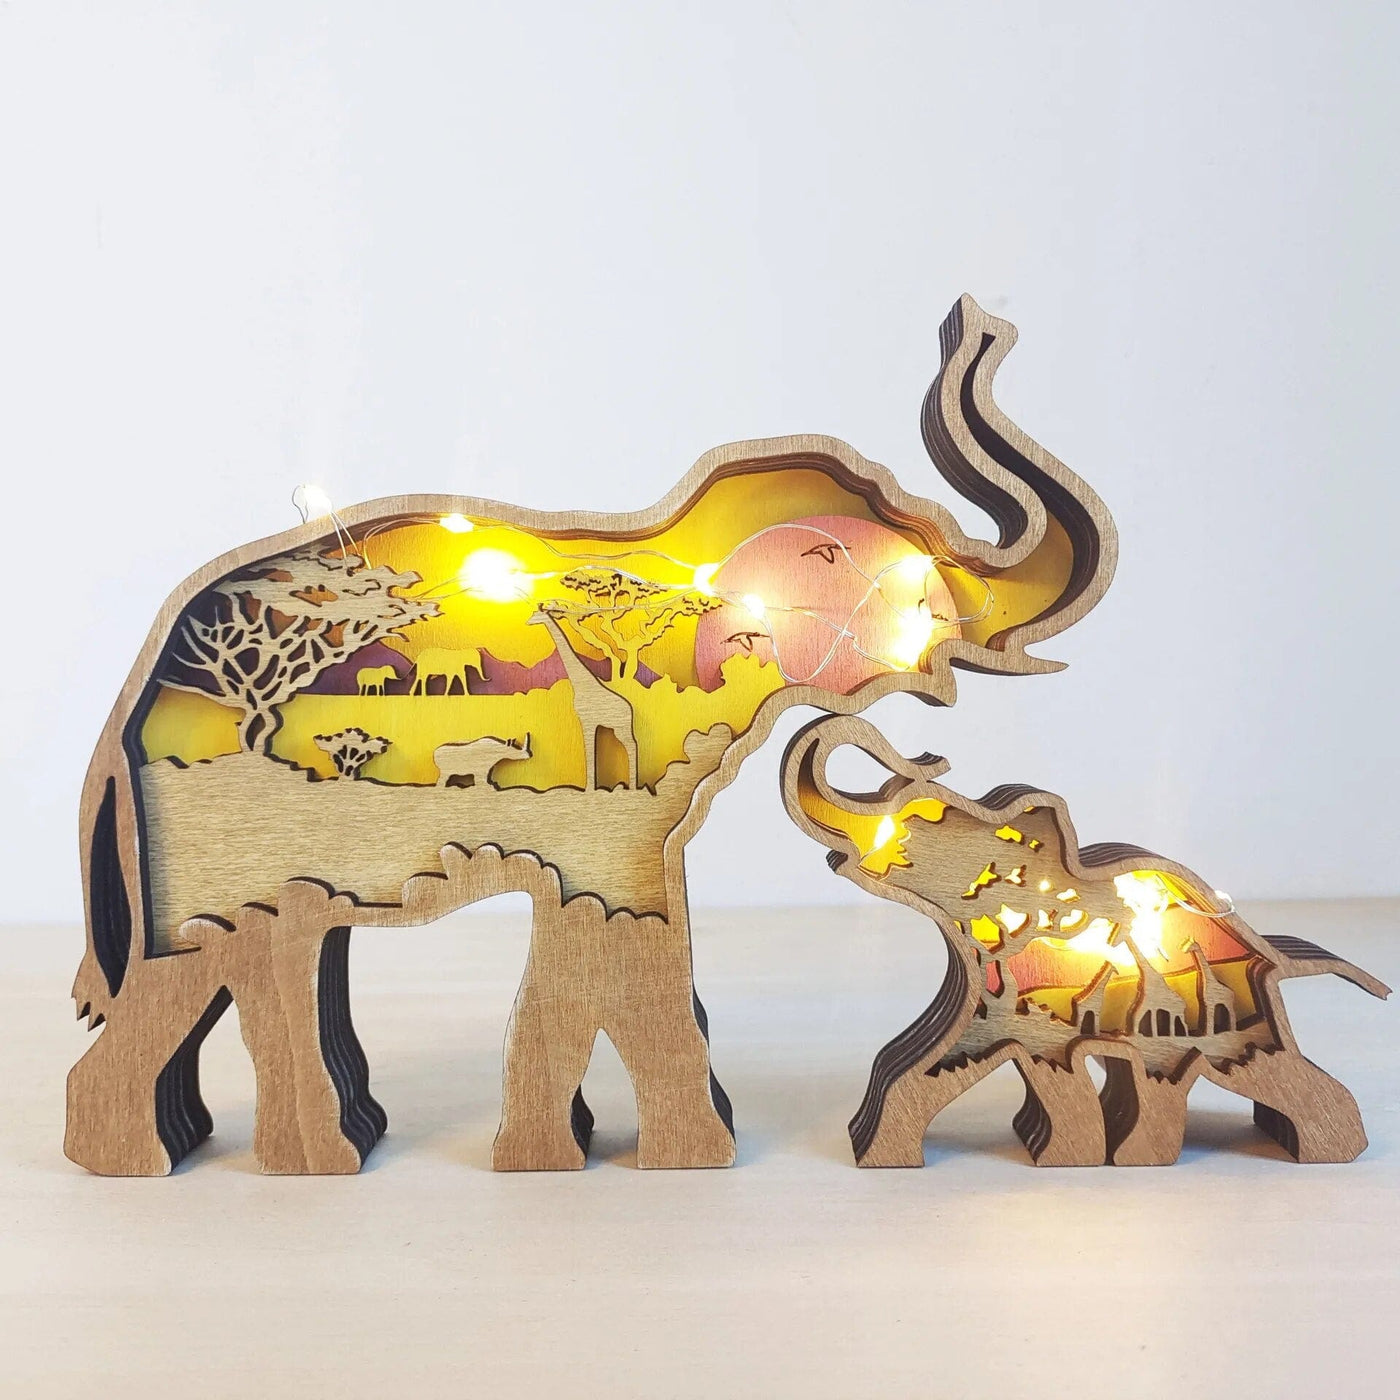 wickedafstore Wooden Elephant Figurine With LED Lights